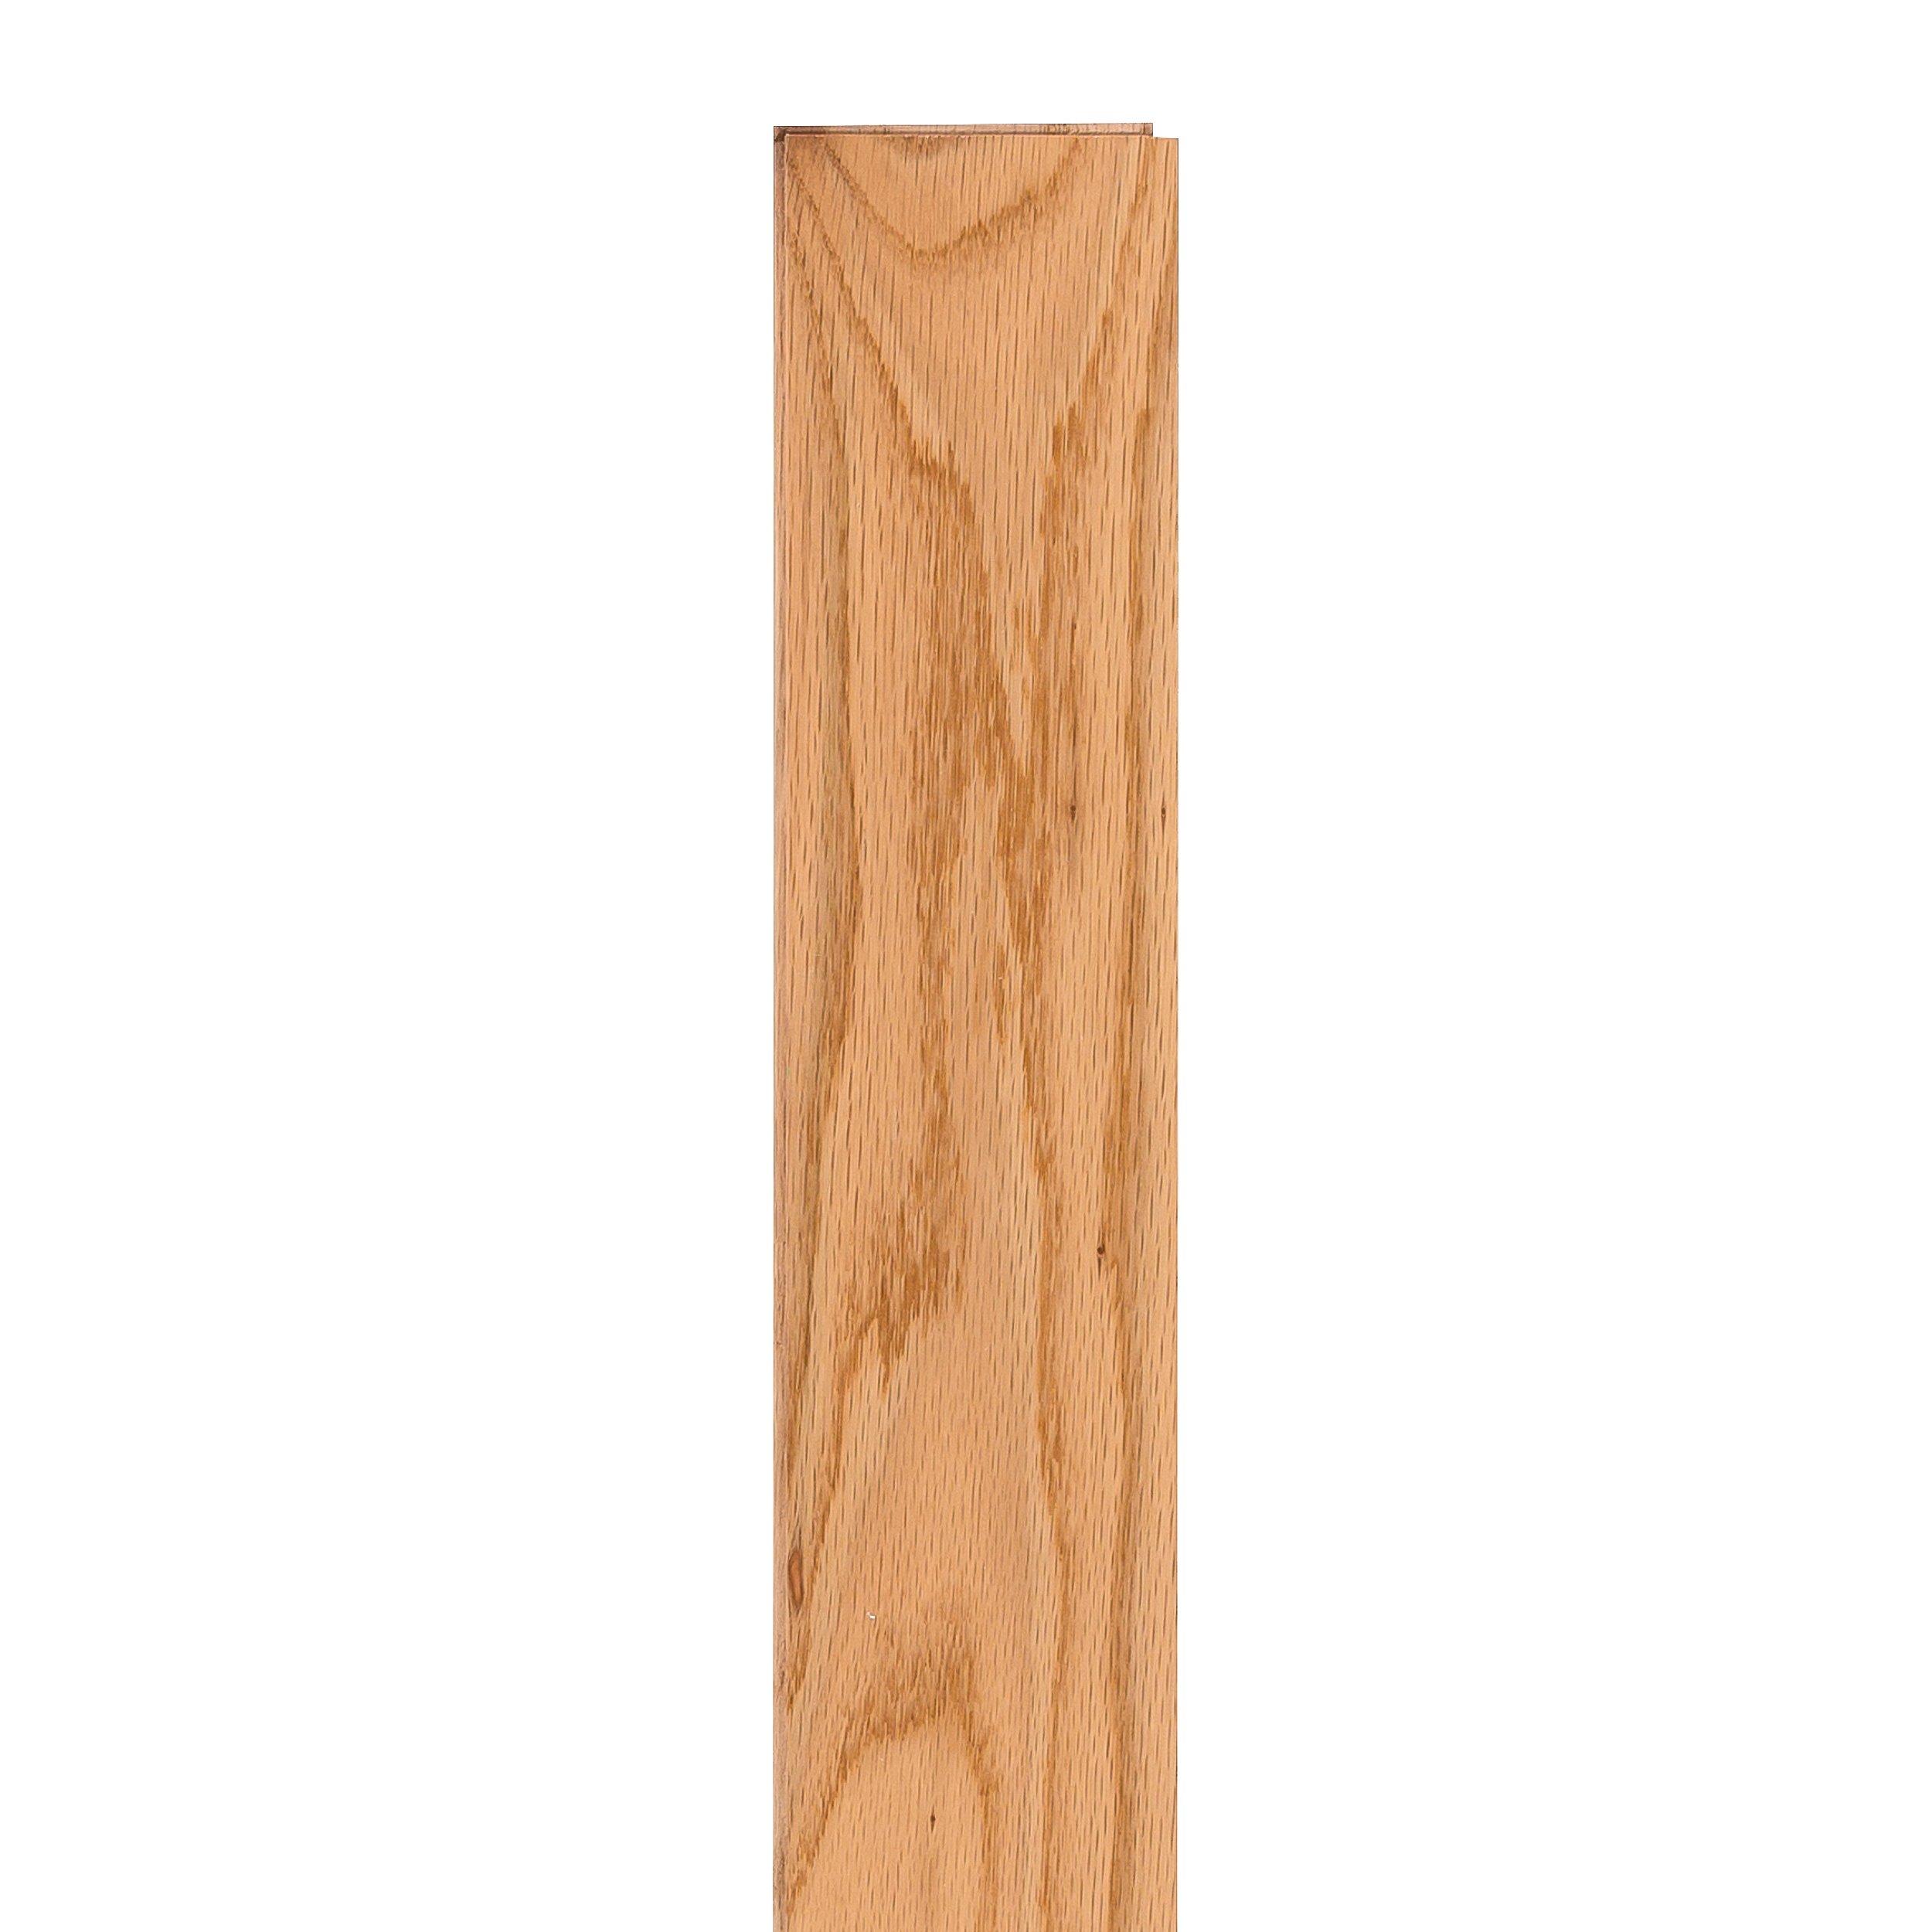 Natural Select Red Oak High Gloss Smooth Solid Hardwood